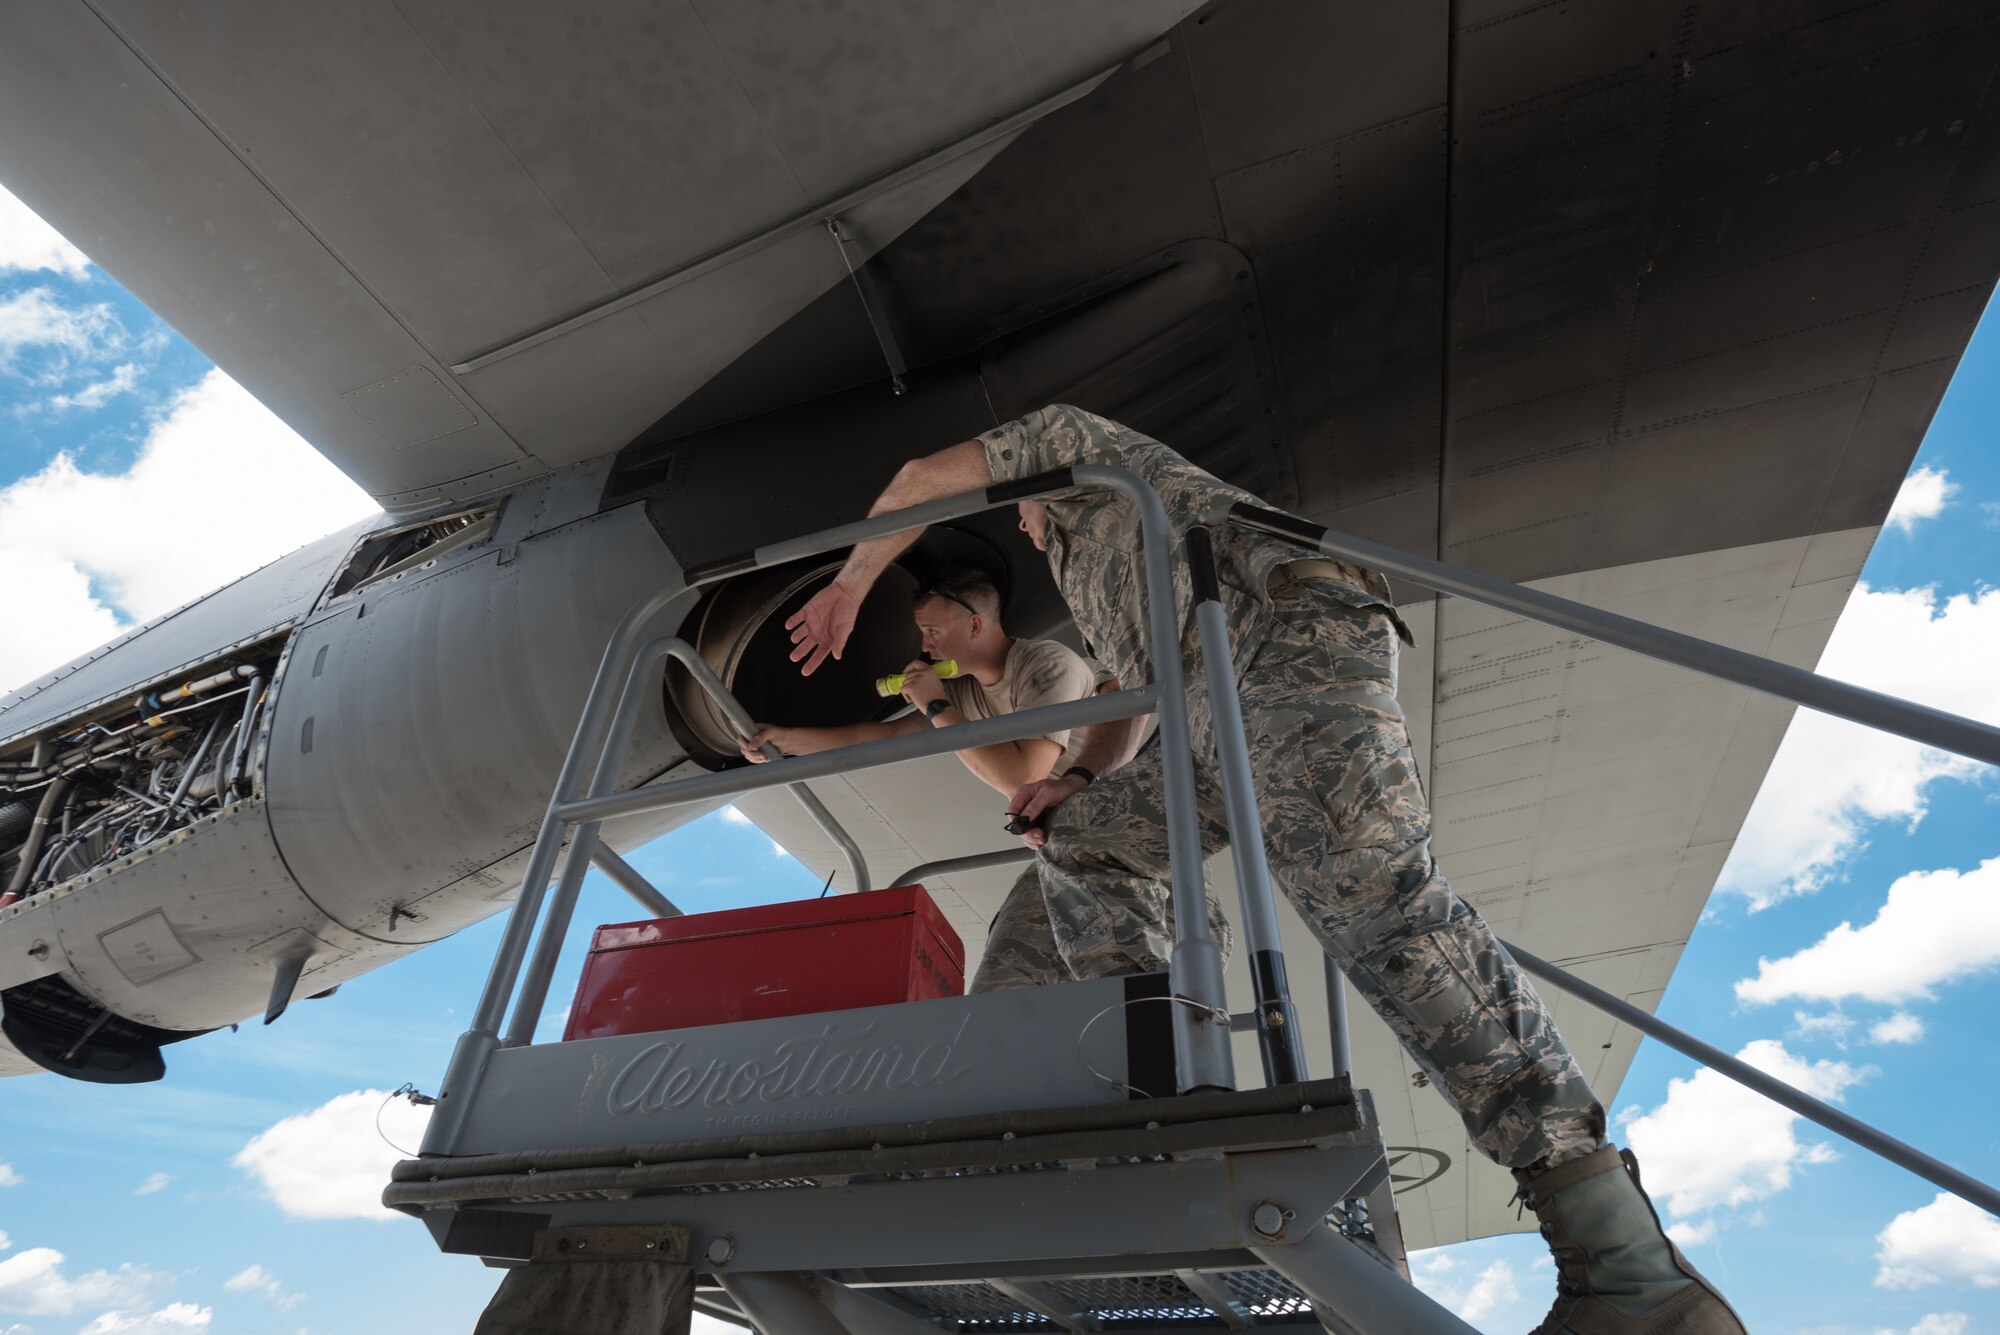 U.S. Air Force Senior Airman Jacob Wilder, a crew chief from the Kentucky Air National Guard’s 123rd Airlift Wing, inspects an exhaust port on a C-130 Hercules aircraft at the Air National Guard’s Air Dominance Center in Savannah, Ga., June 15, 2016. Wilder is attending Maintenance University here, a weeklong course designed to provide intensive instruction in aircraft maintenance. Now in its eighth year, Maintenance University is sponsored by the 123rd Airlift Wing. (U.S. Air National Guard photo by Lt. Col. Dale Greer)